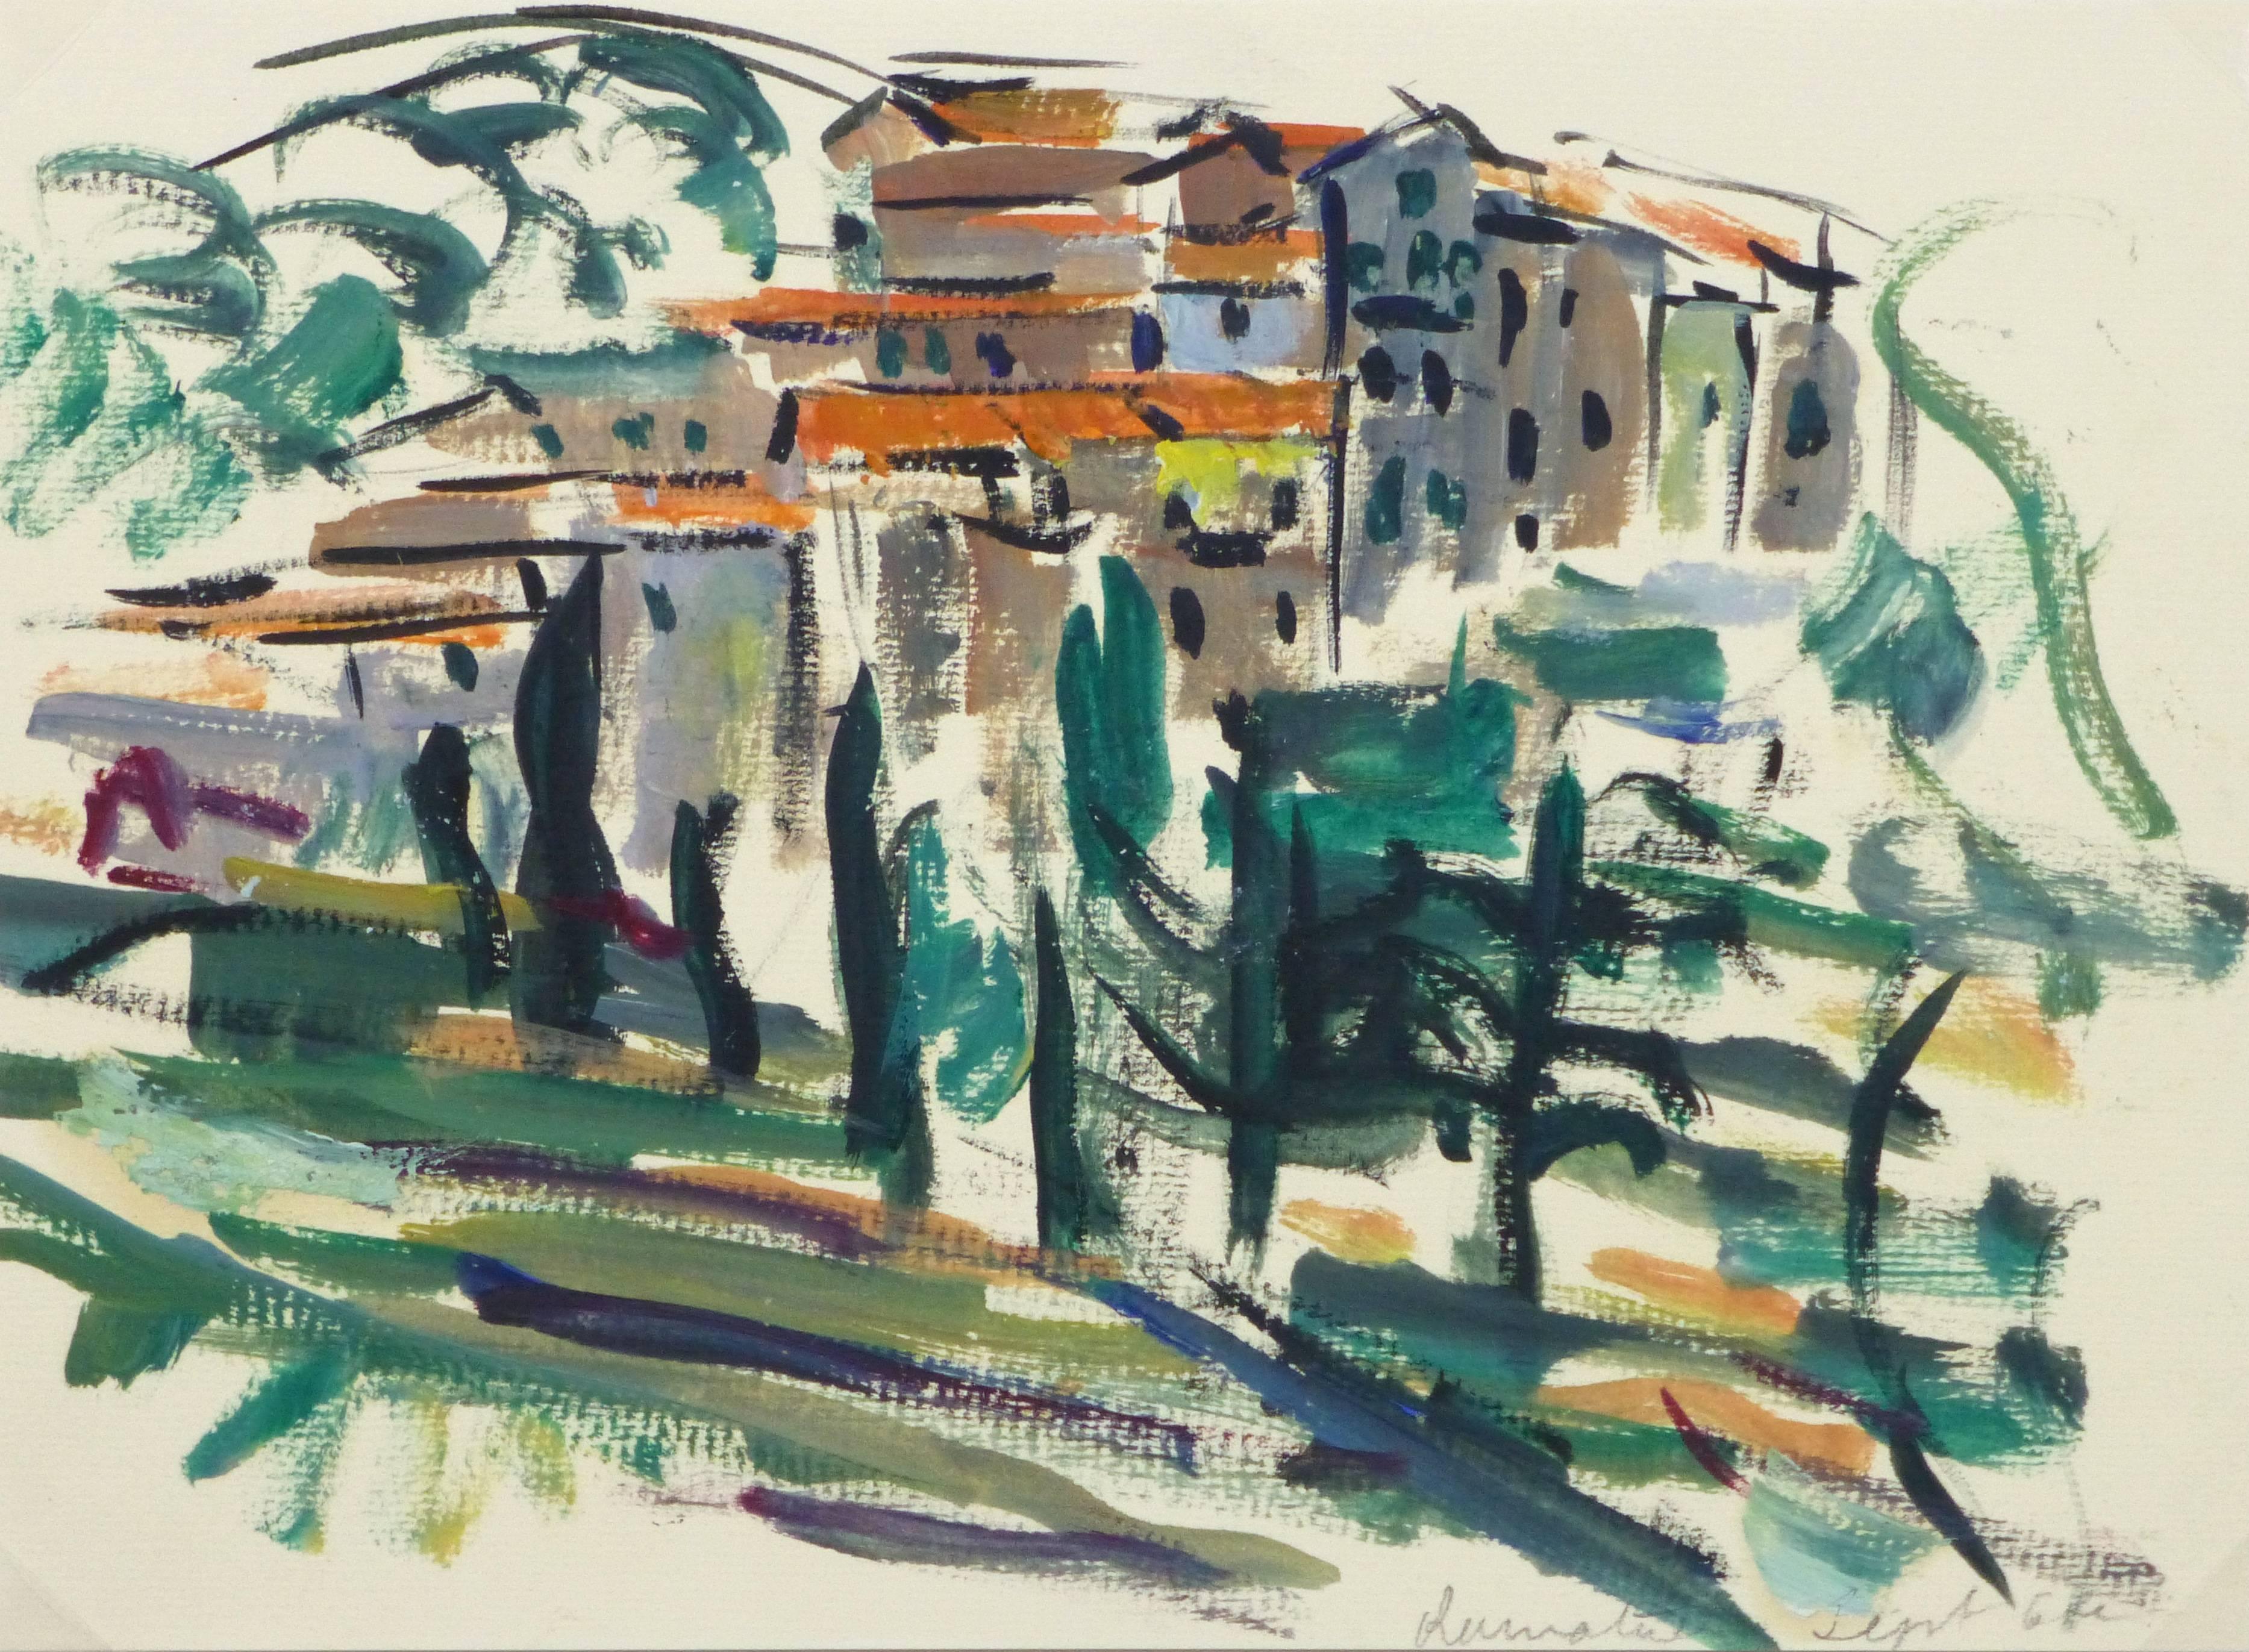 Delightful acrylic landscape painting of a small Italian town perched on a lush mountainside by artist Odette Bruriaux (1923-2003), 1966. Titled and dated lower right.

Original one-of-a-kind artwork on paper displayed on a white mat with a gold